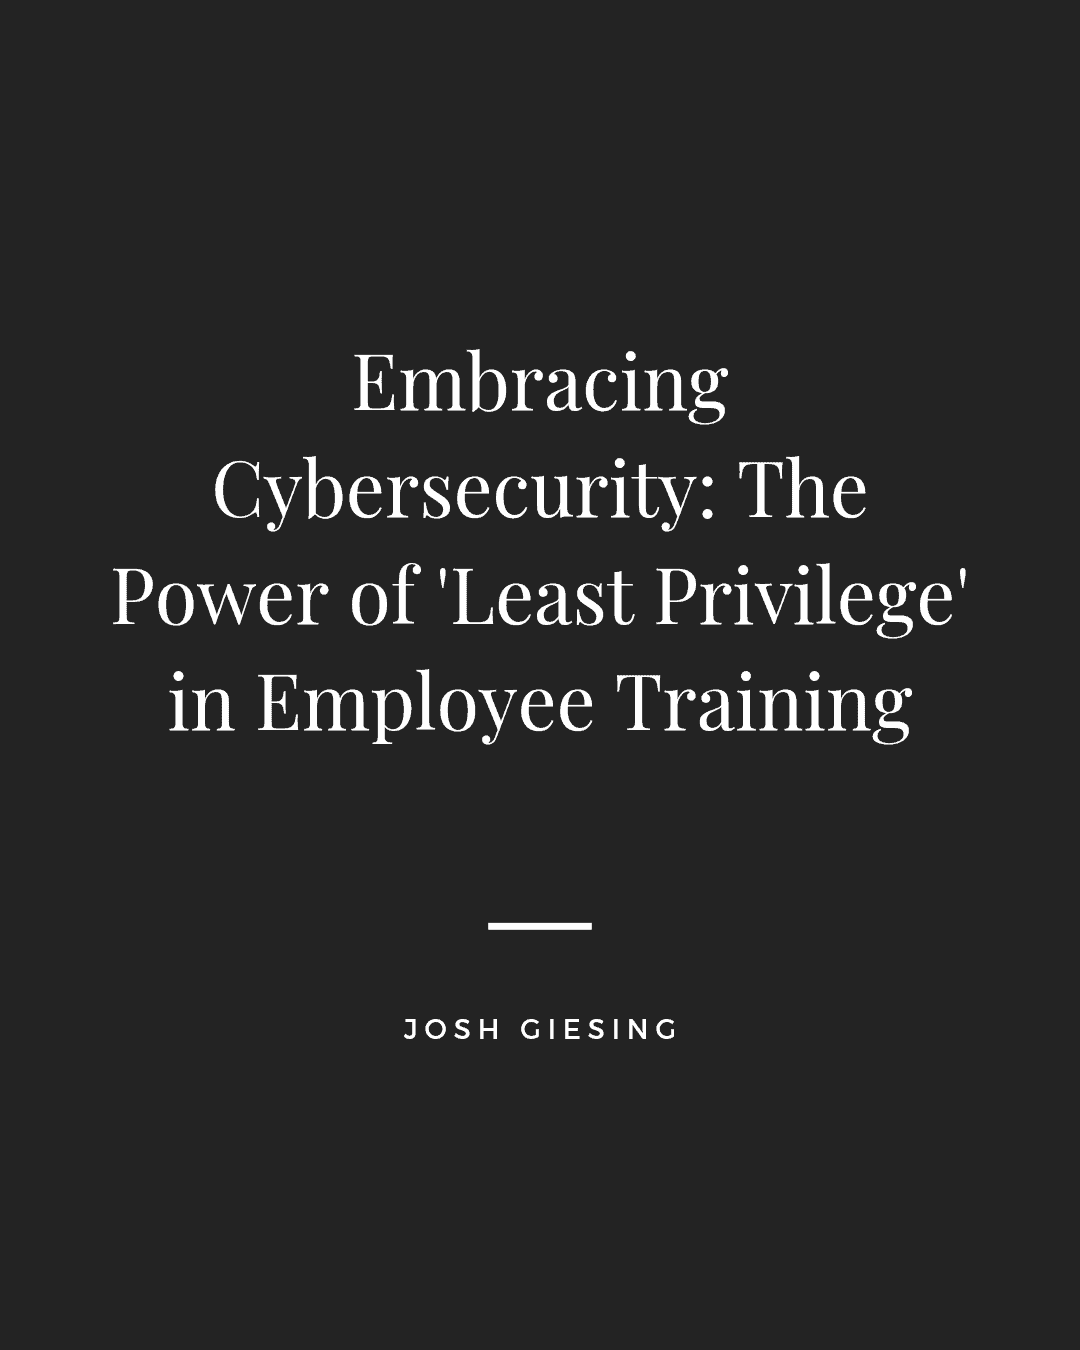 Embracing Cybersecurity: The Power of ‘Least Privilege’ in Employee Training